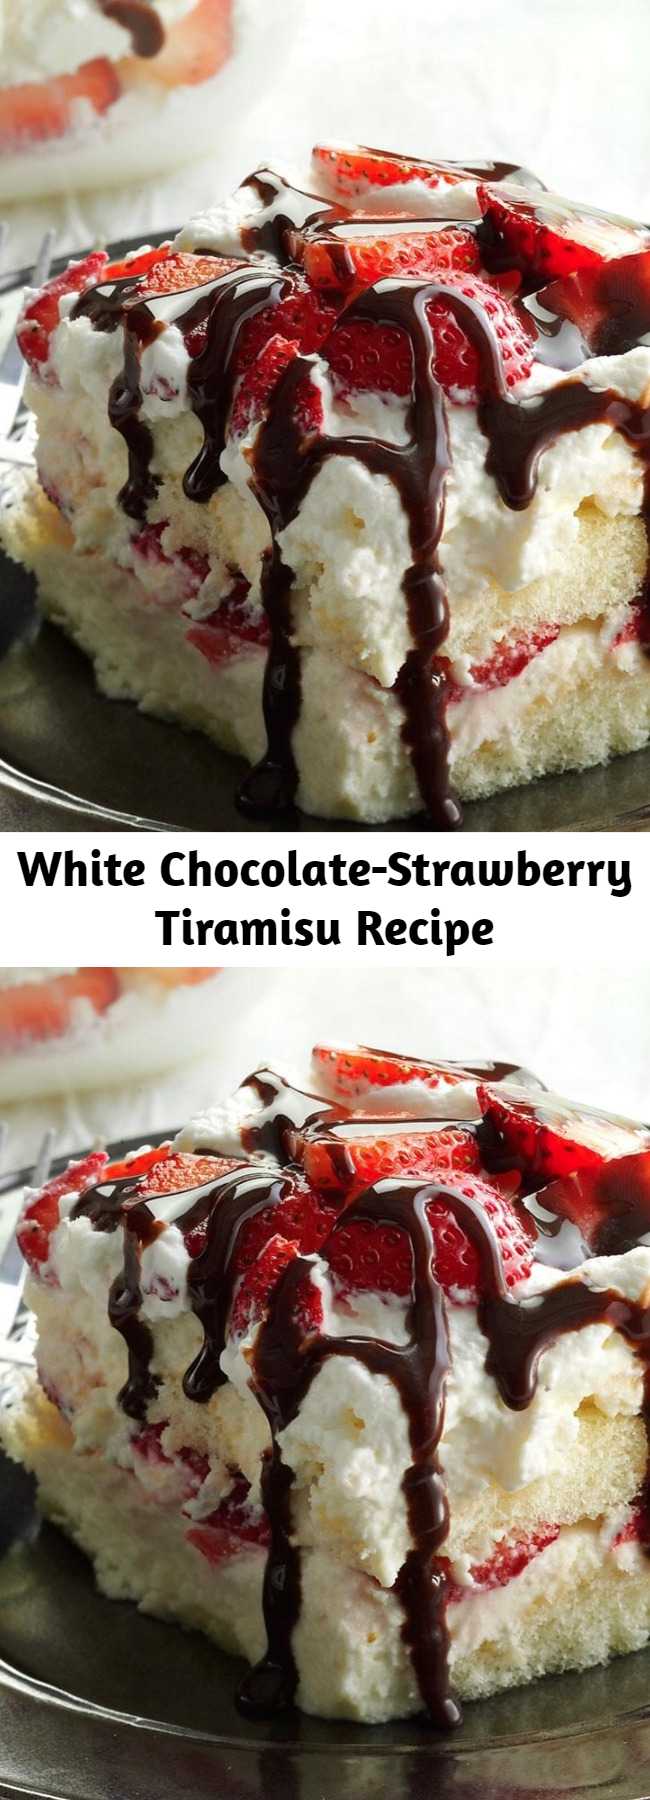 White Chocolate-Strawberry Tiramisu Recipe - Here's a twist on a classic dessert that highlights another flavor combo my husband and I love: strawberries and white chocolate. Lighten it up if you'd like—I've had good luck with light nondairy whipped topping and reduced-fat cream cheese.